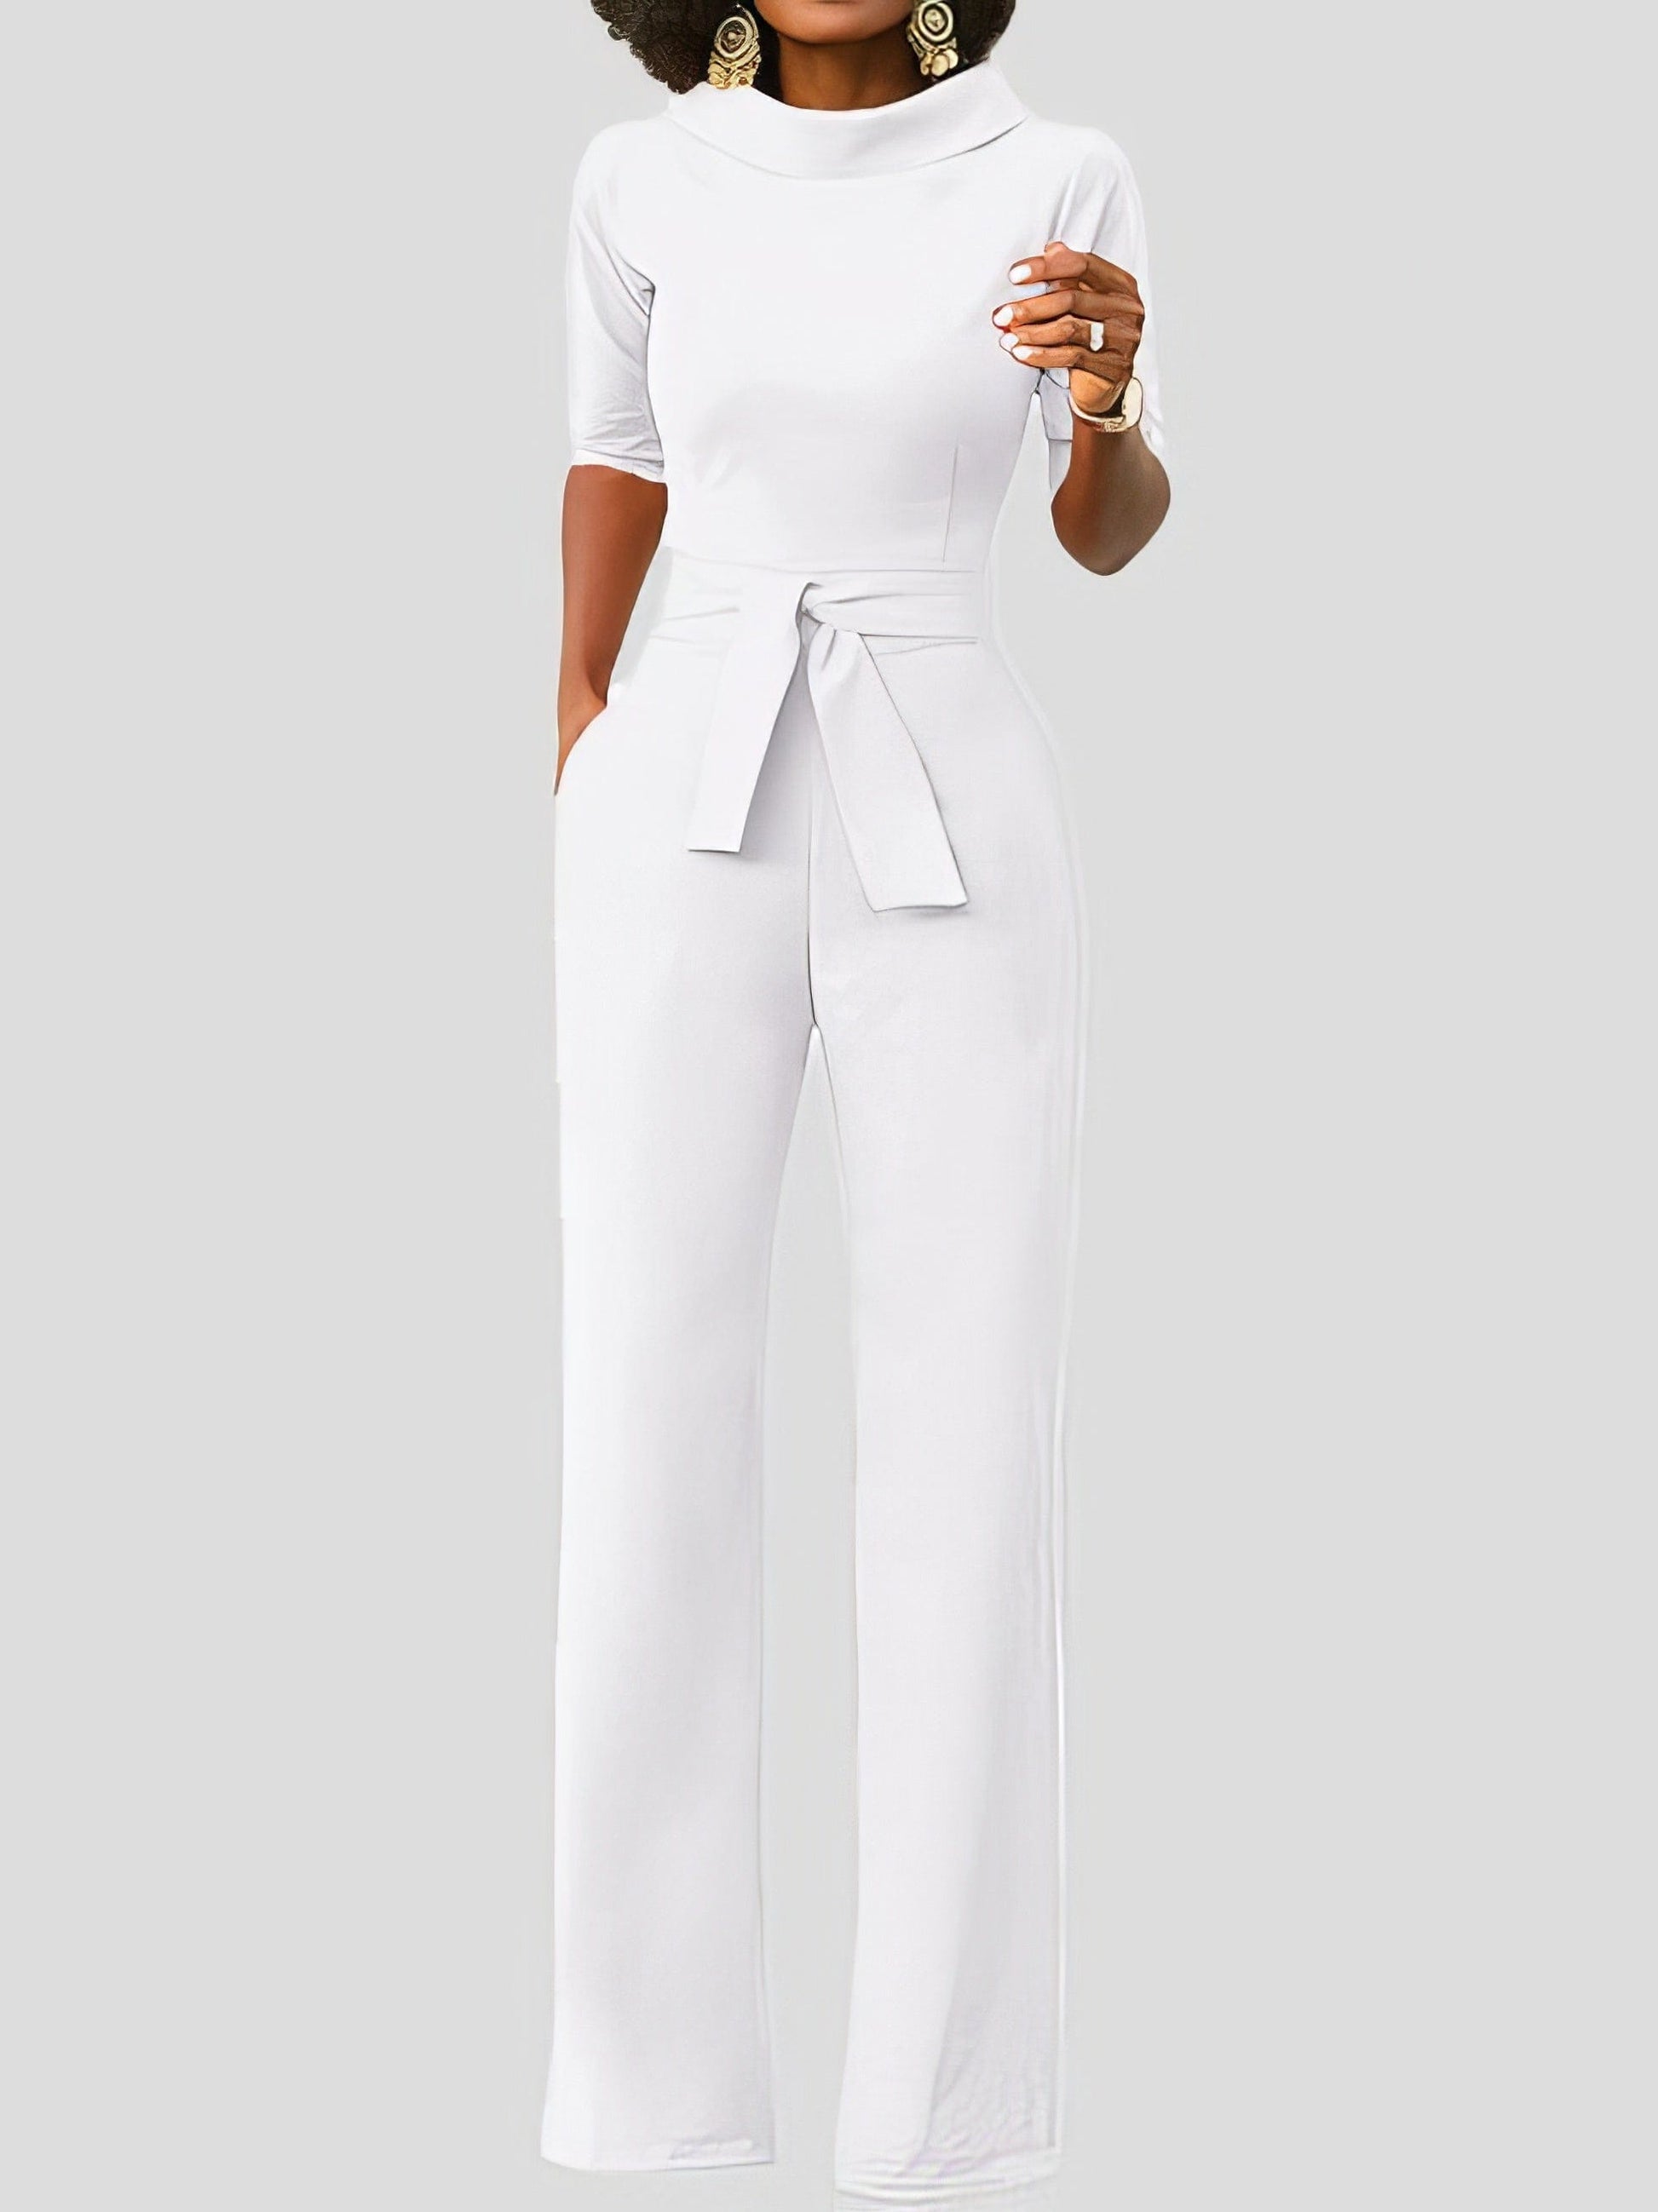 MsDressly Jumpsuits Solid Five-Point Sleeve Belted Wide-Leg Jumpsuit